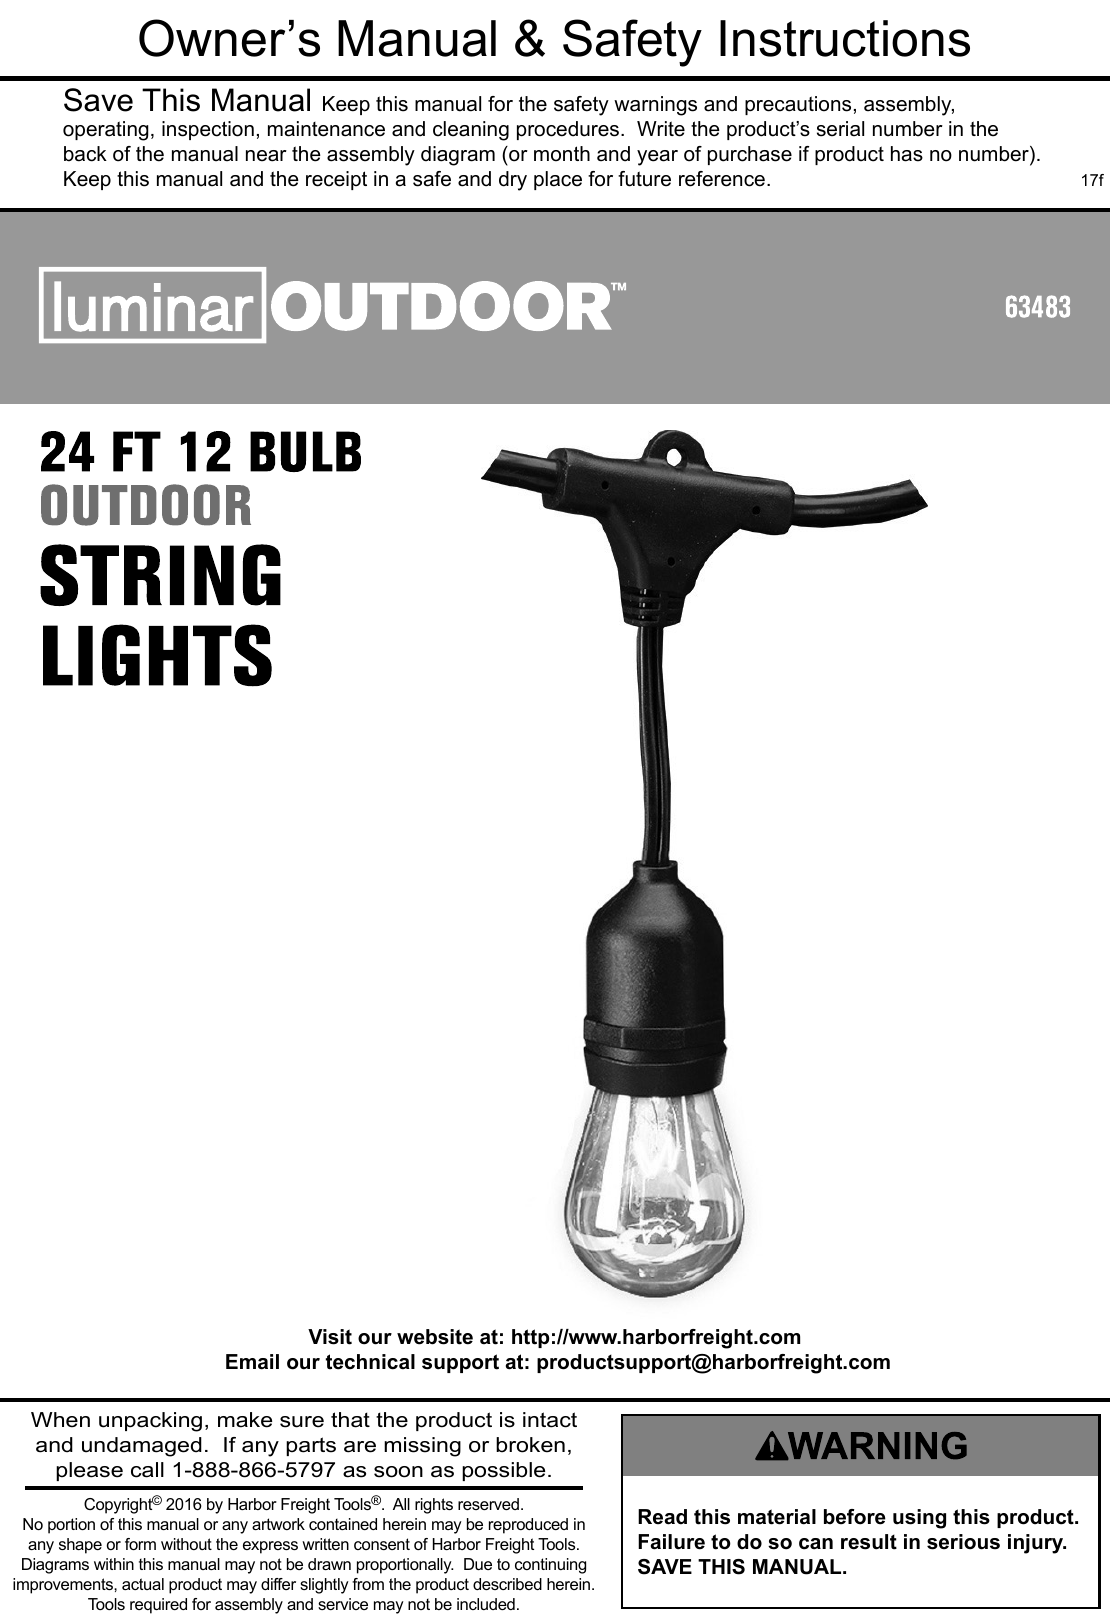 Page 1 of 4 - Manual For The 63483 24 Ft. 12 Bulb Outdoor String Lights